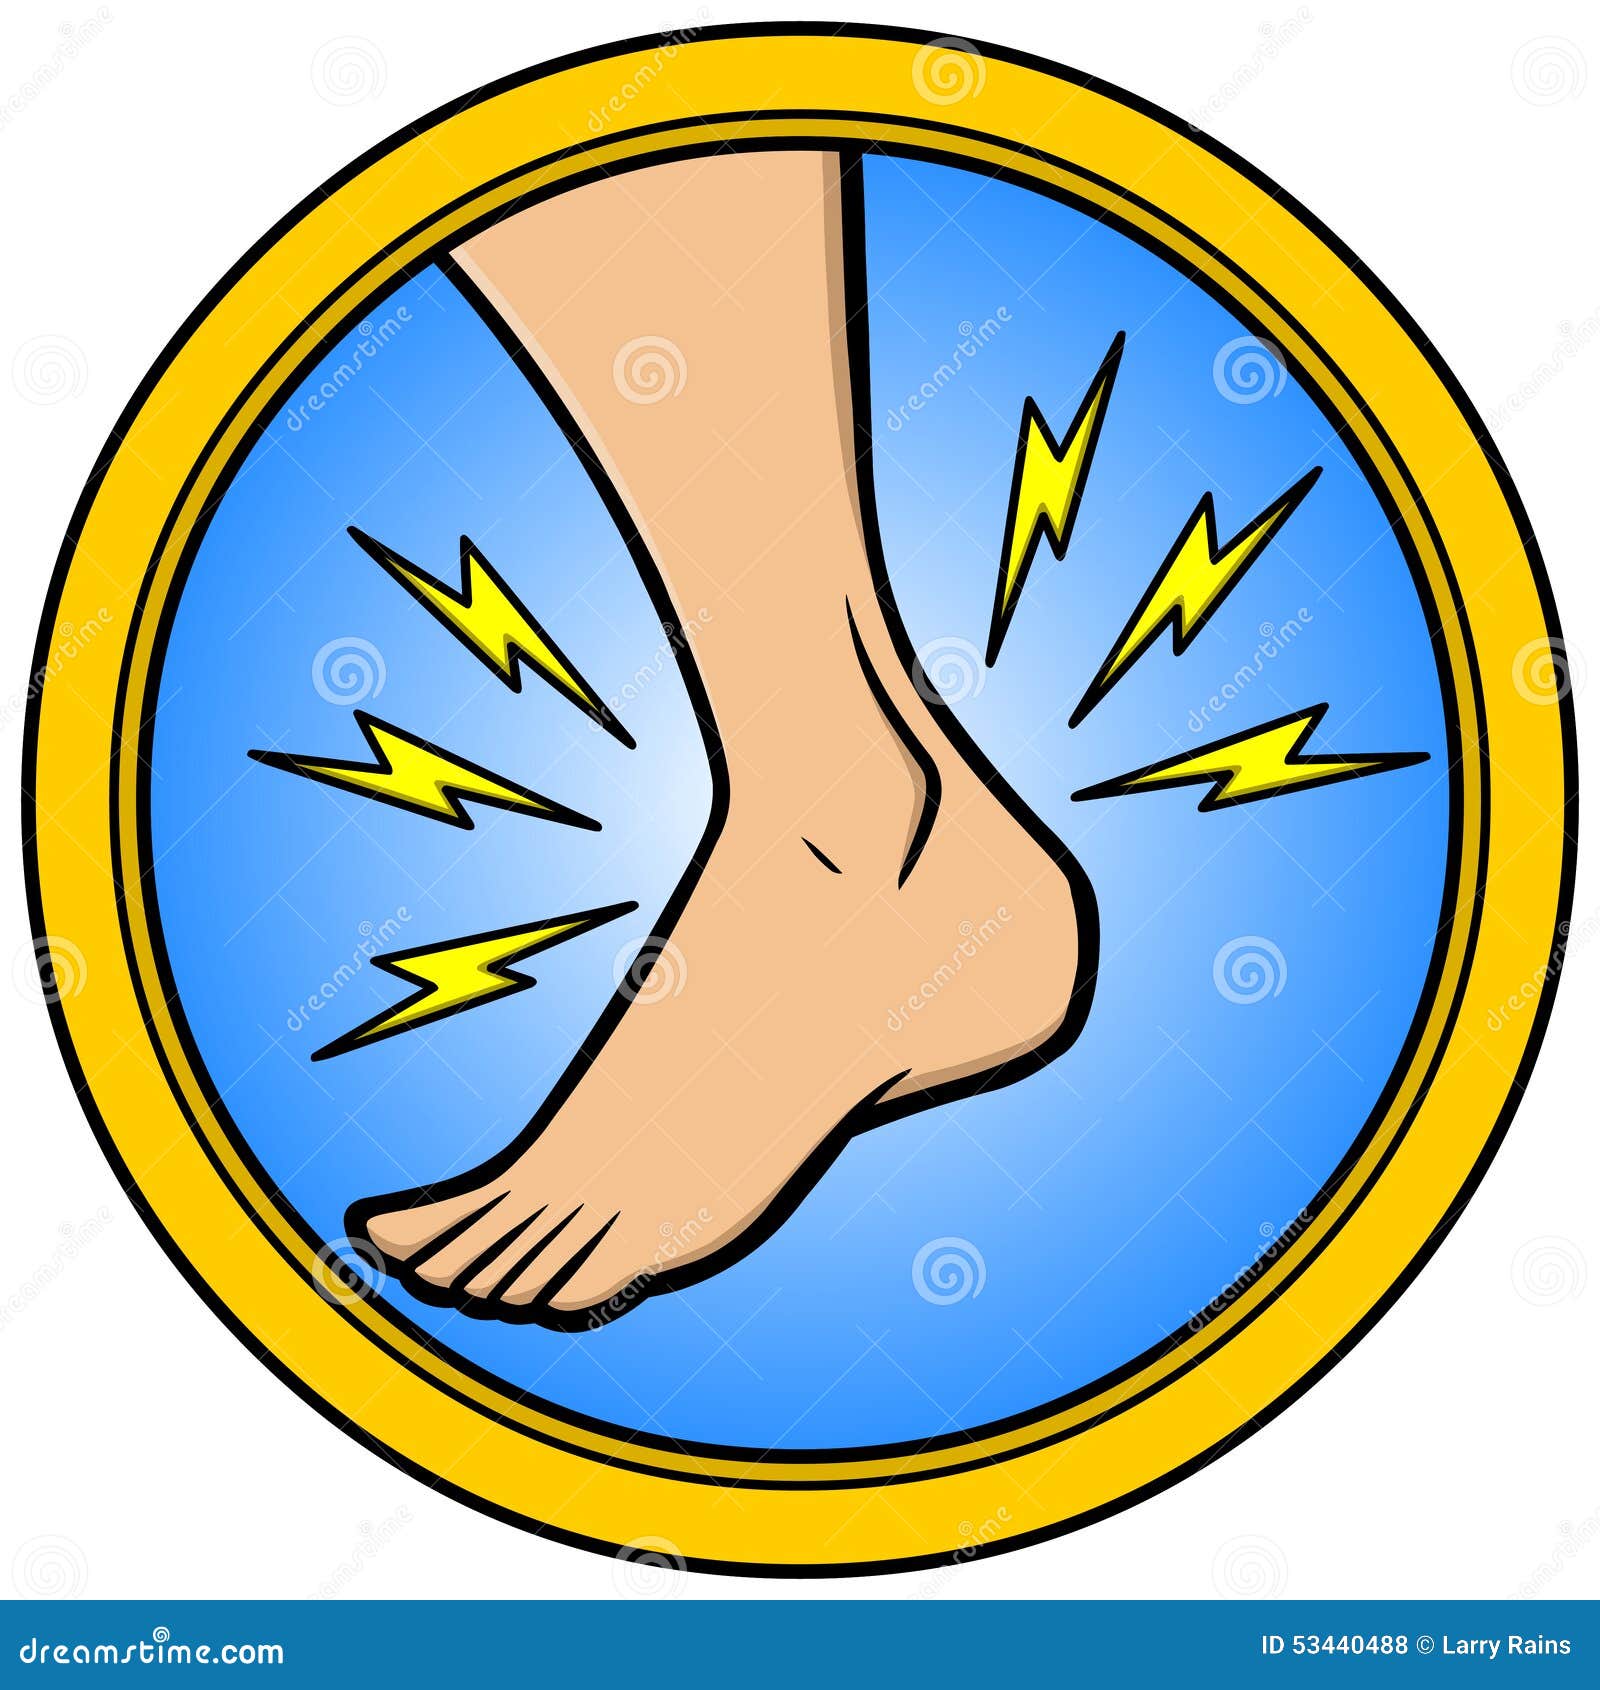 Ankle Injury stock vector. Illustration of person, ankle - 53440488